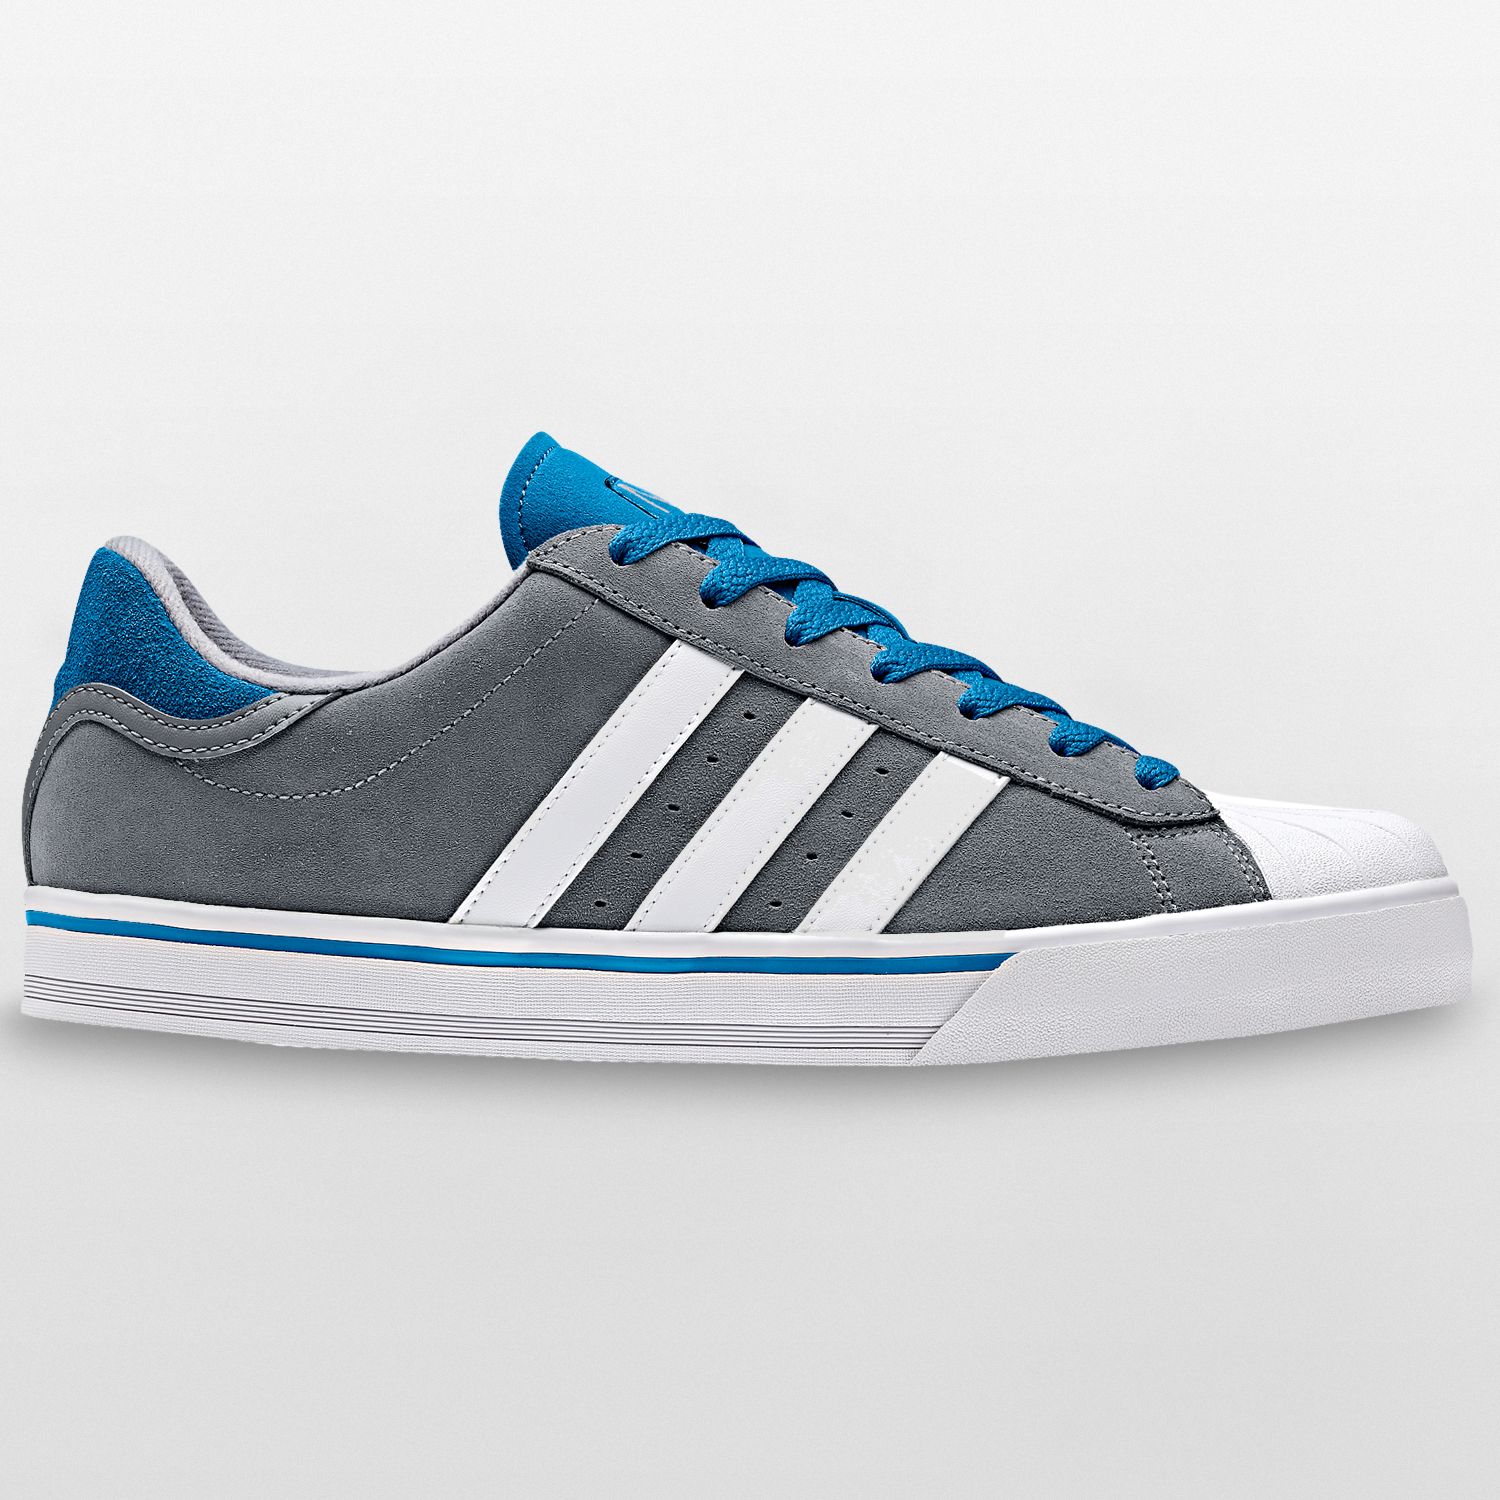 adidas neo classic athletic shoes